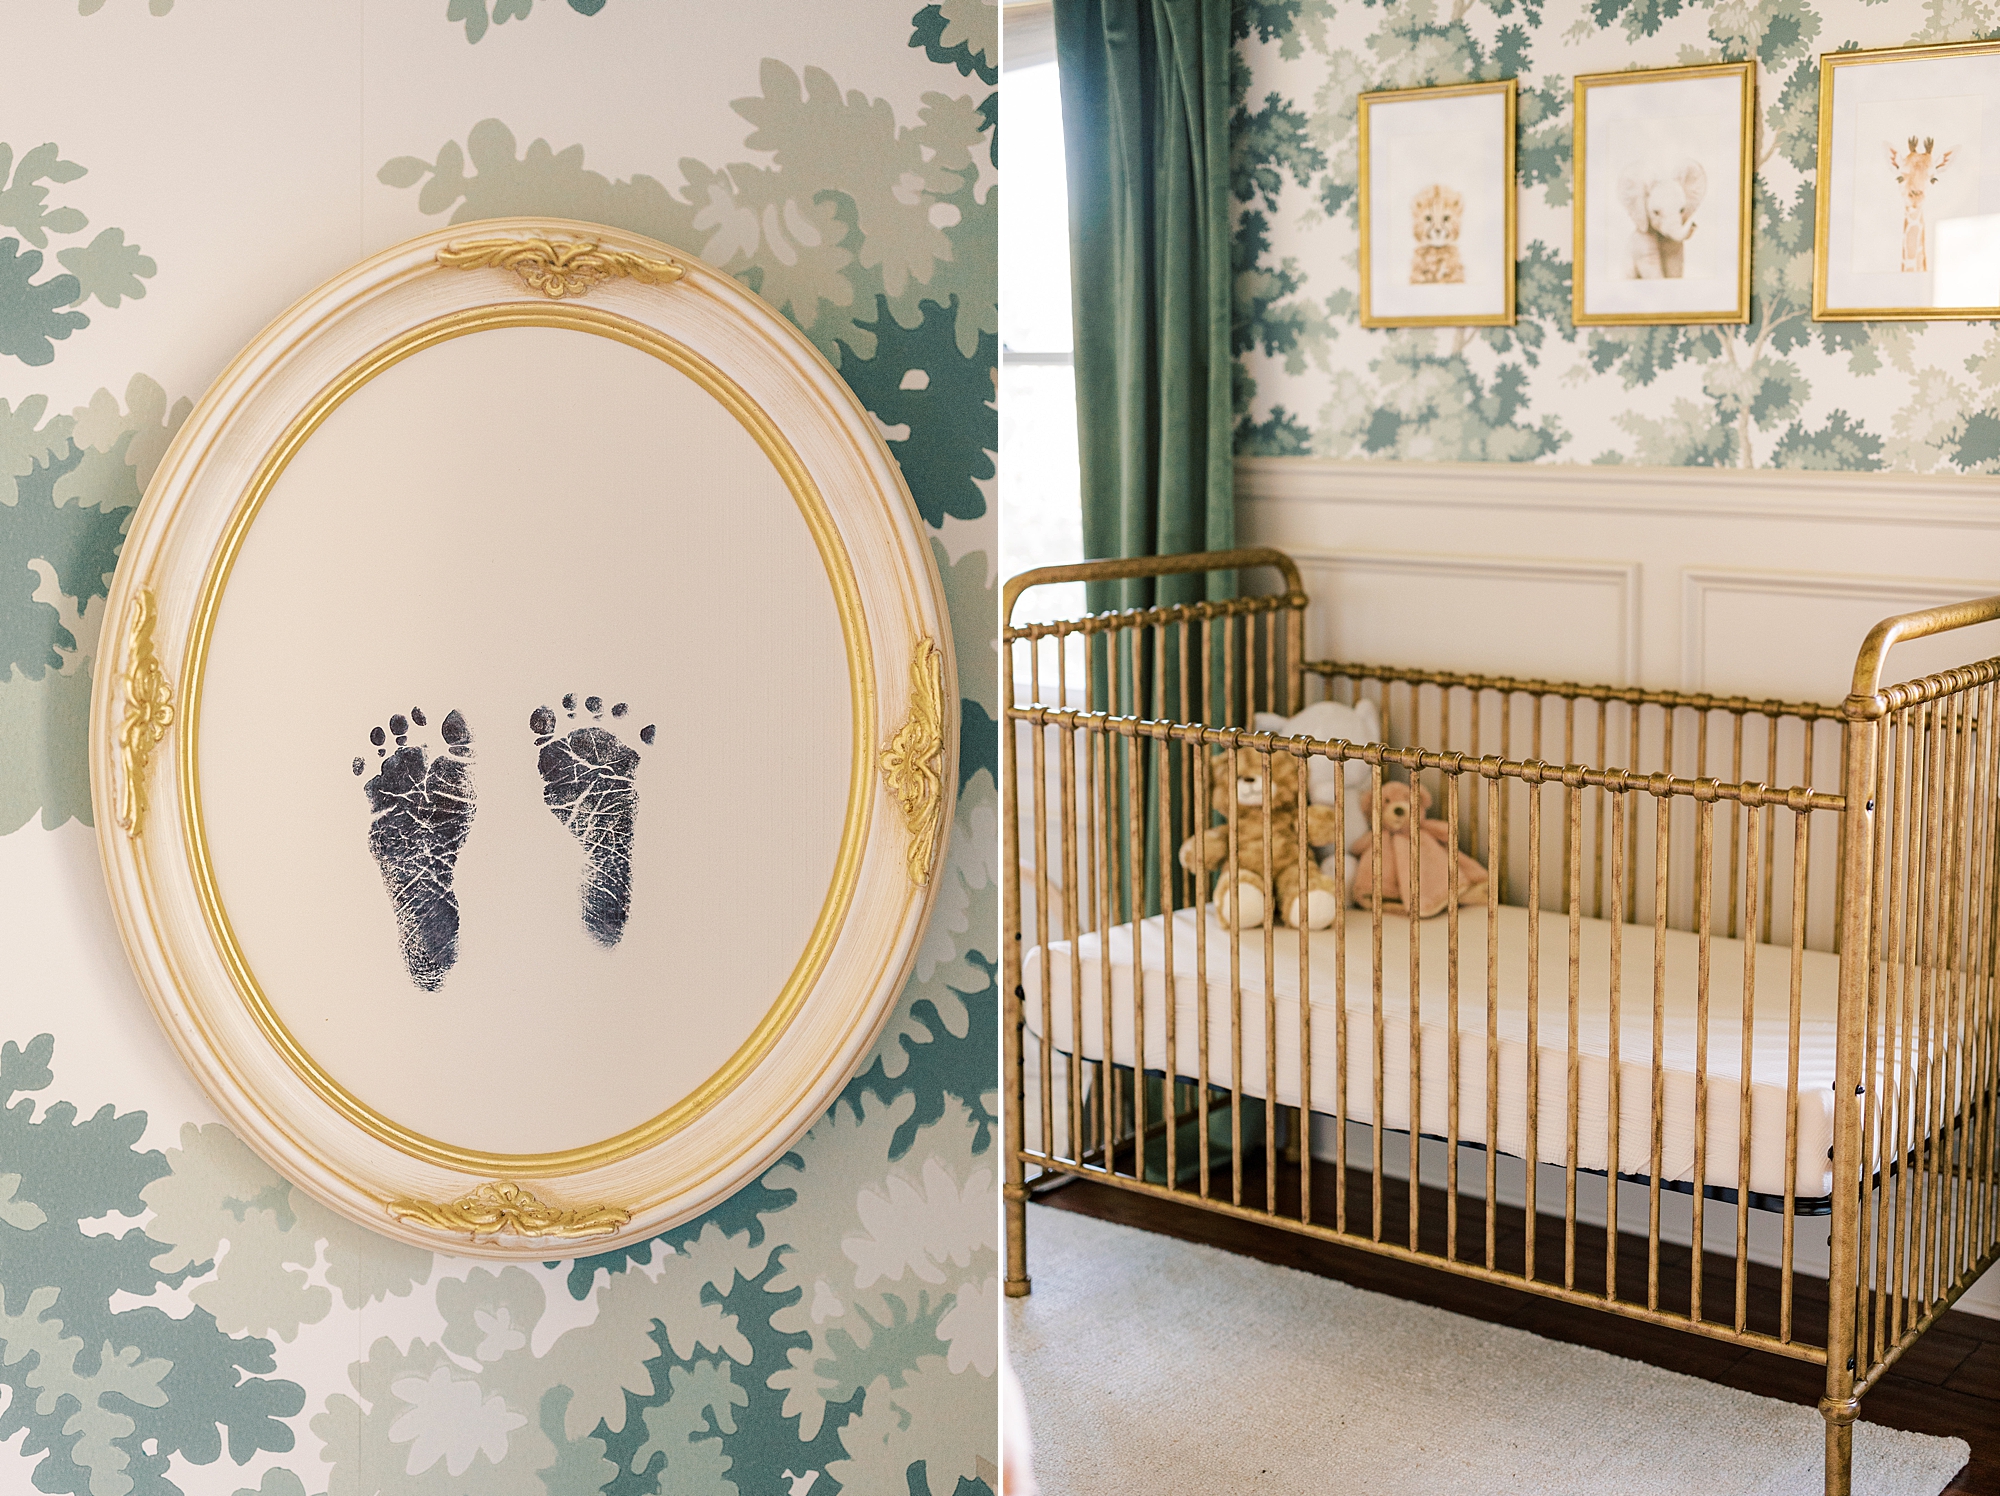 baby's gold crib with footprints in gold frame on wall with green wallpaper 